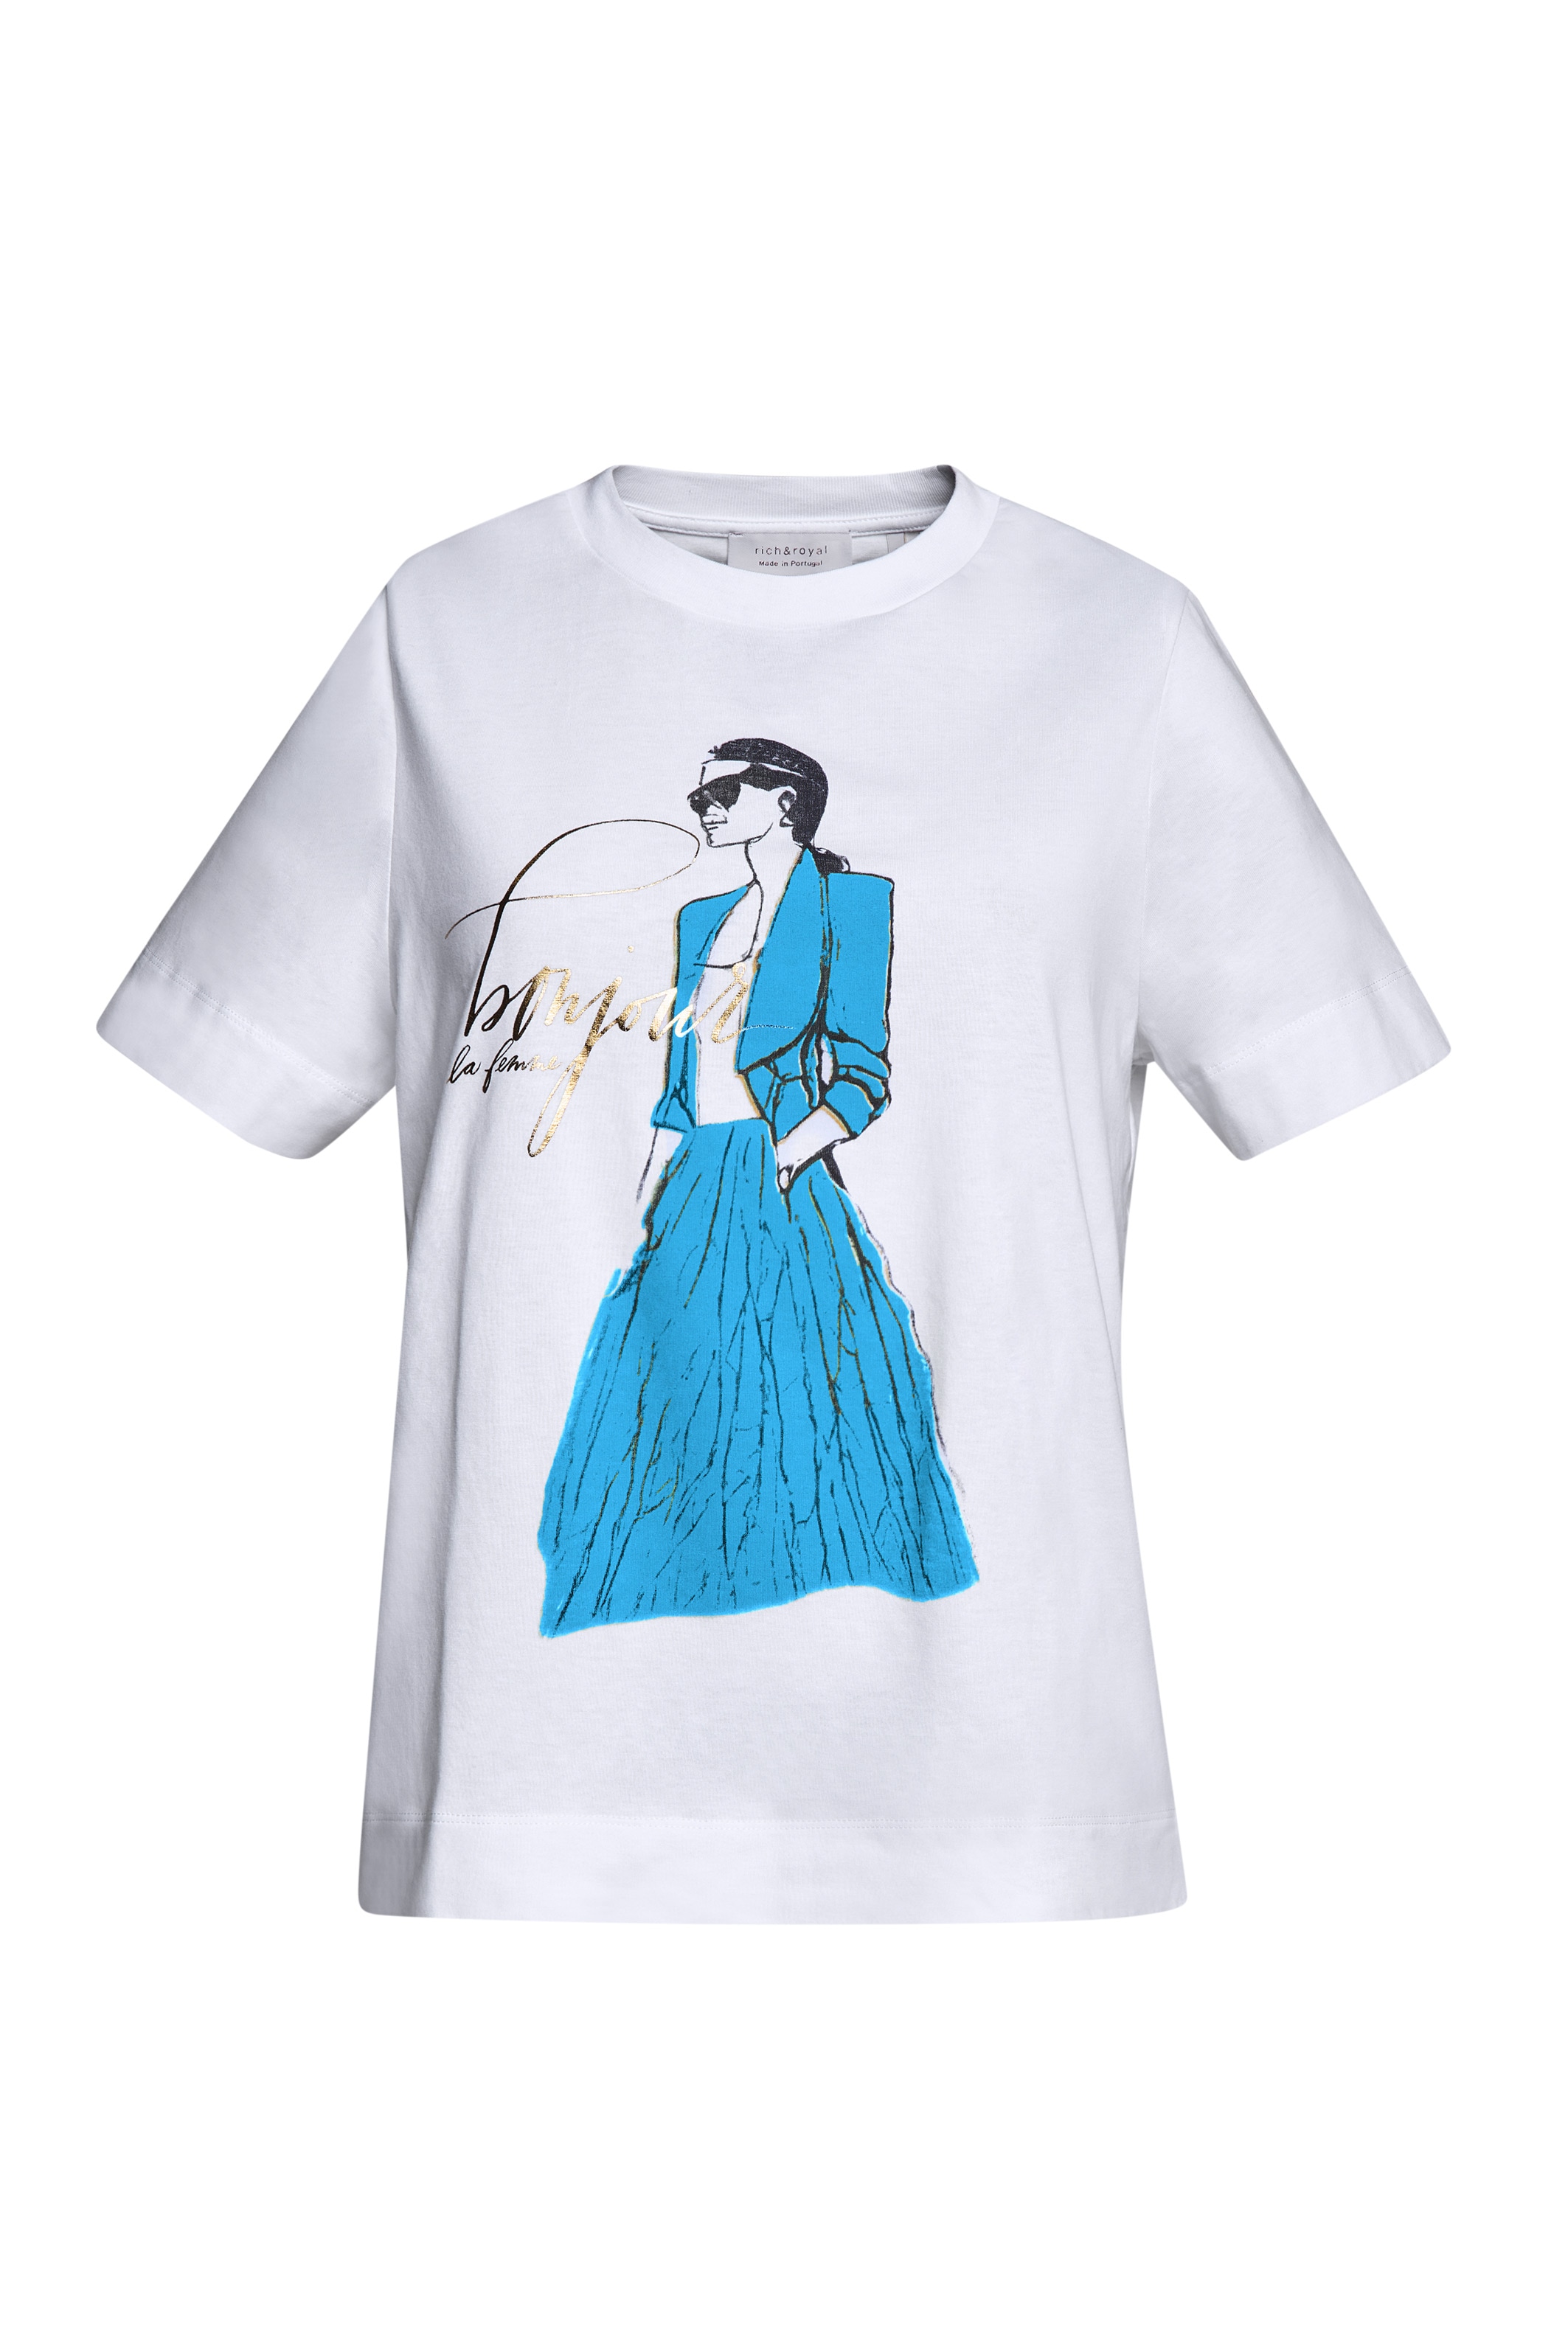 Rich & Royal T-Shirt, Easy fit T-Shirt "Bonjour" with woman print